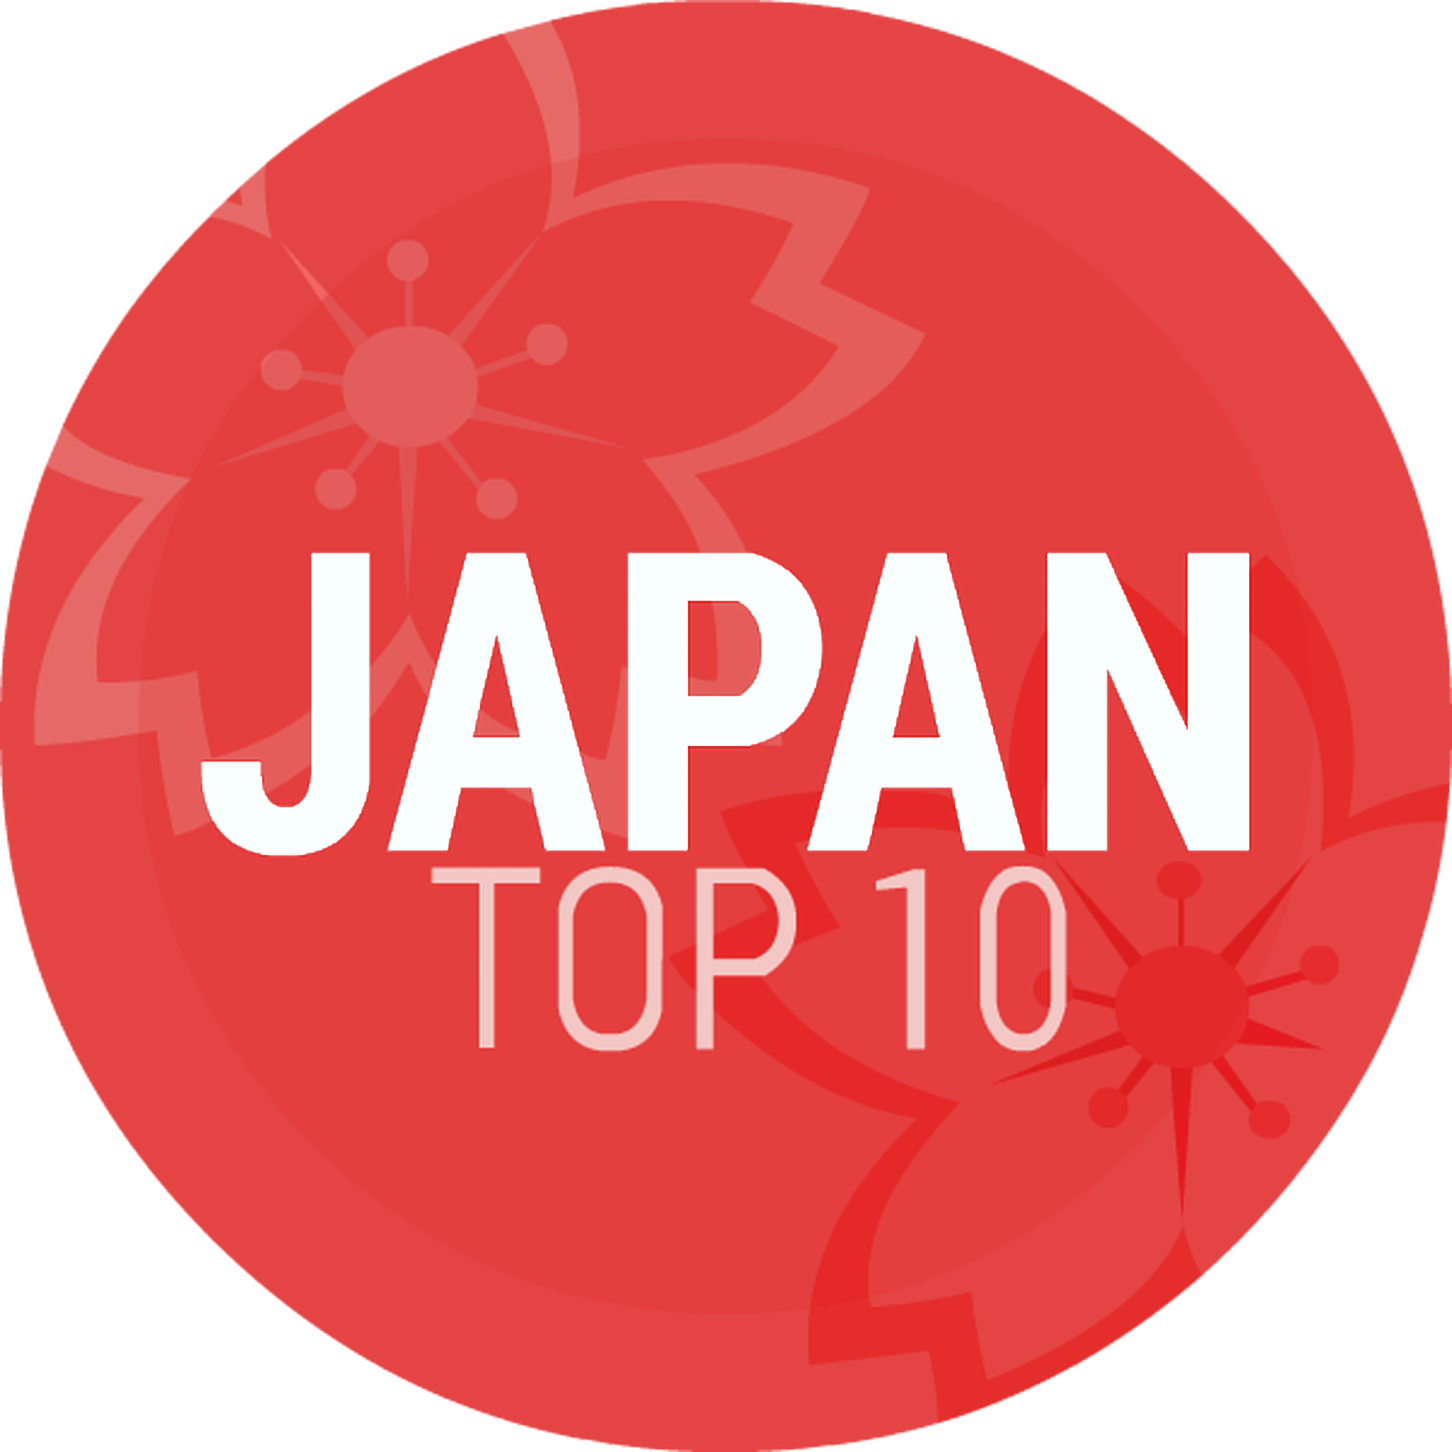 Episode 317: Japan Top 10 March 2020 Artist of the Month: Yōsui Inoue (Dean's Pick) 